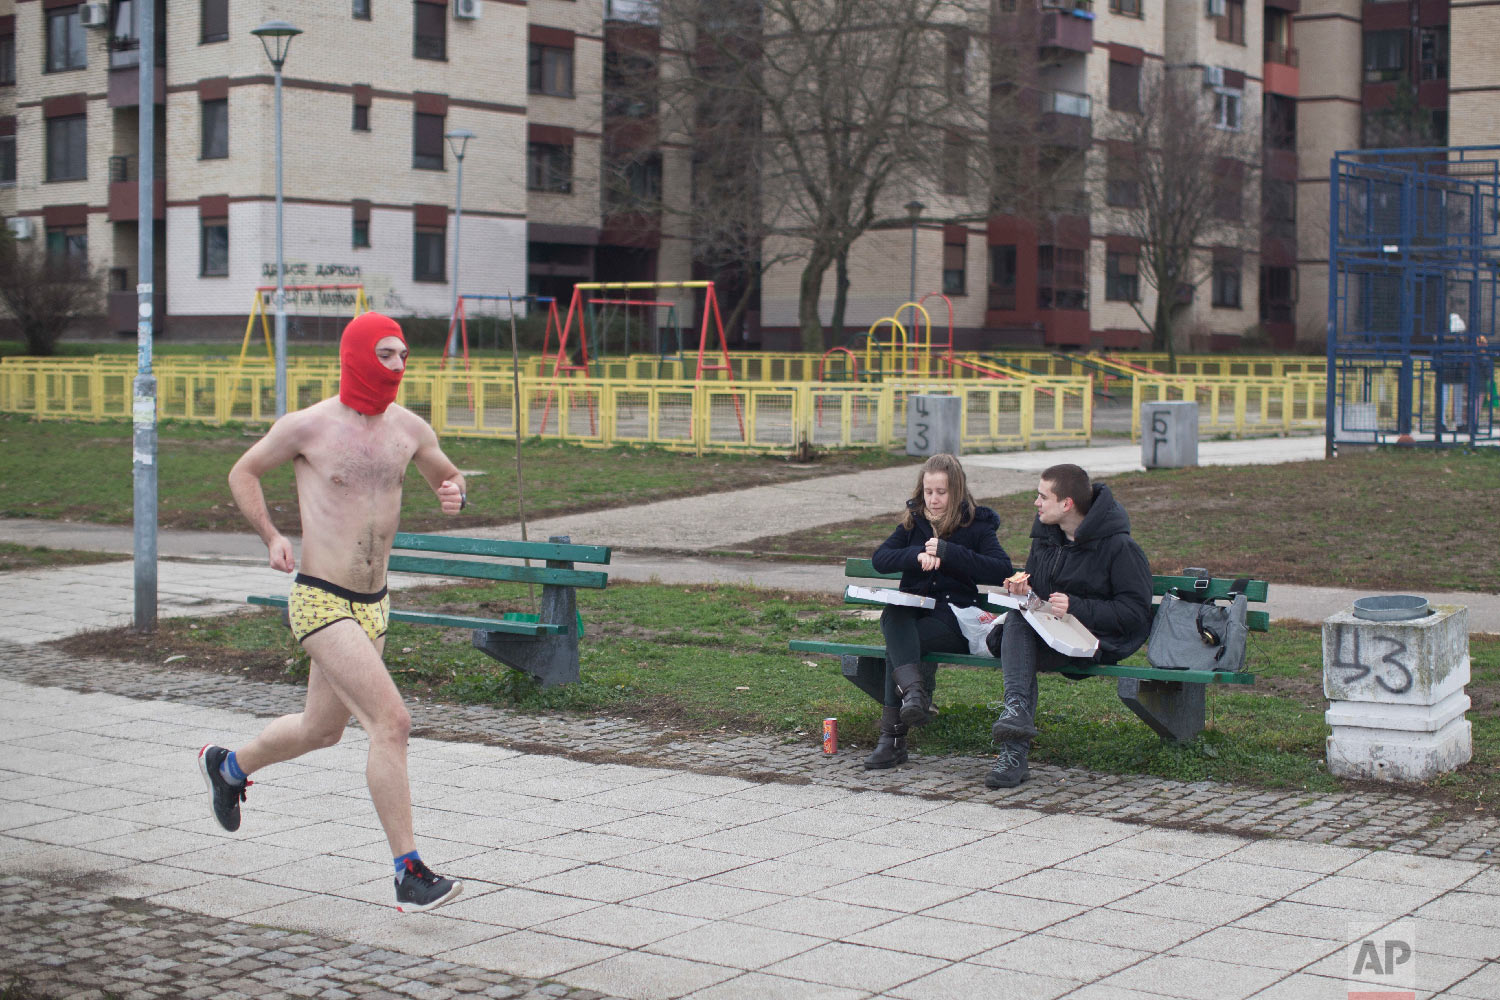  A competitor takes part at the 2nd annual Belgrade Underpants Run on the banks of the Danube in Belgrade, Serbia on Feb. 4, 2018. (AP Photo/Marko Drobnjakovic) 